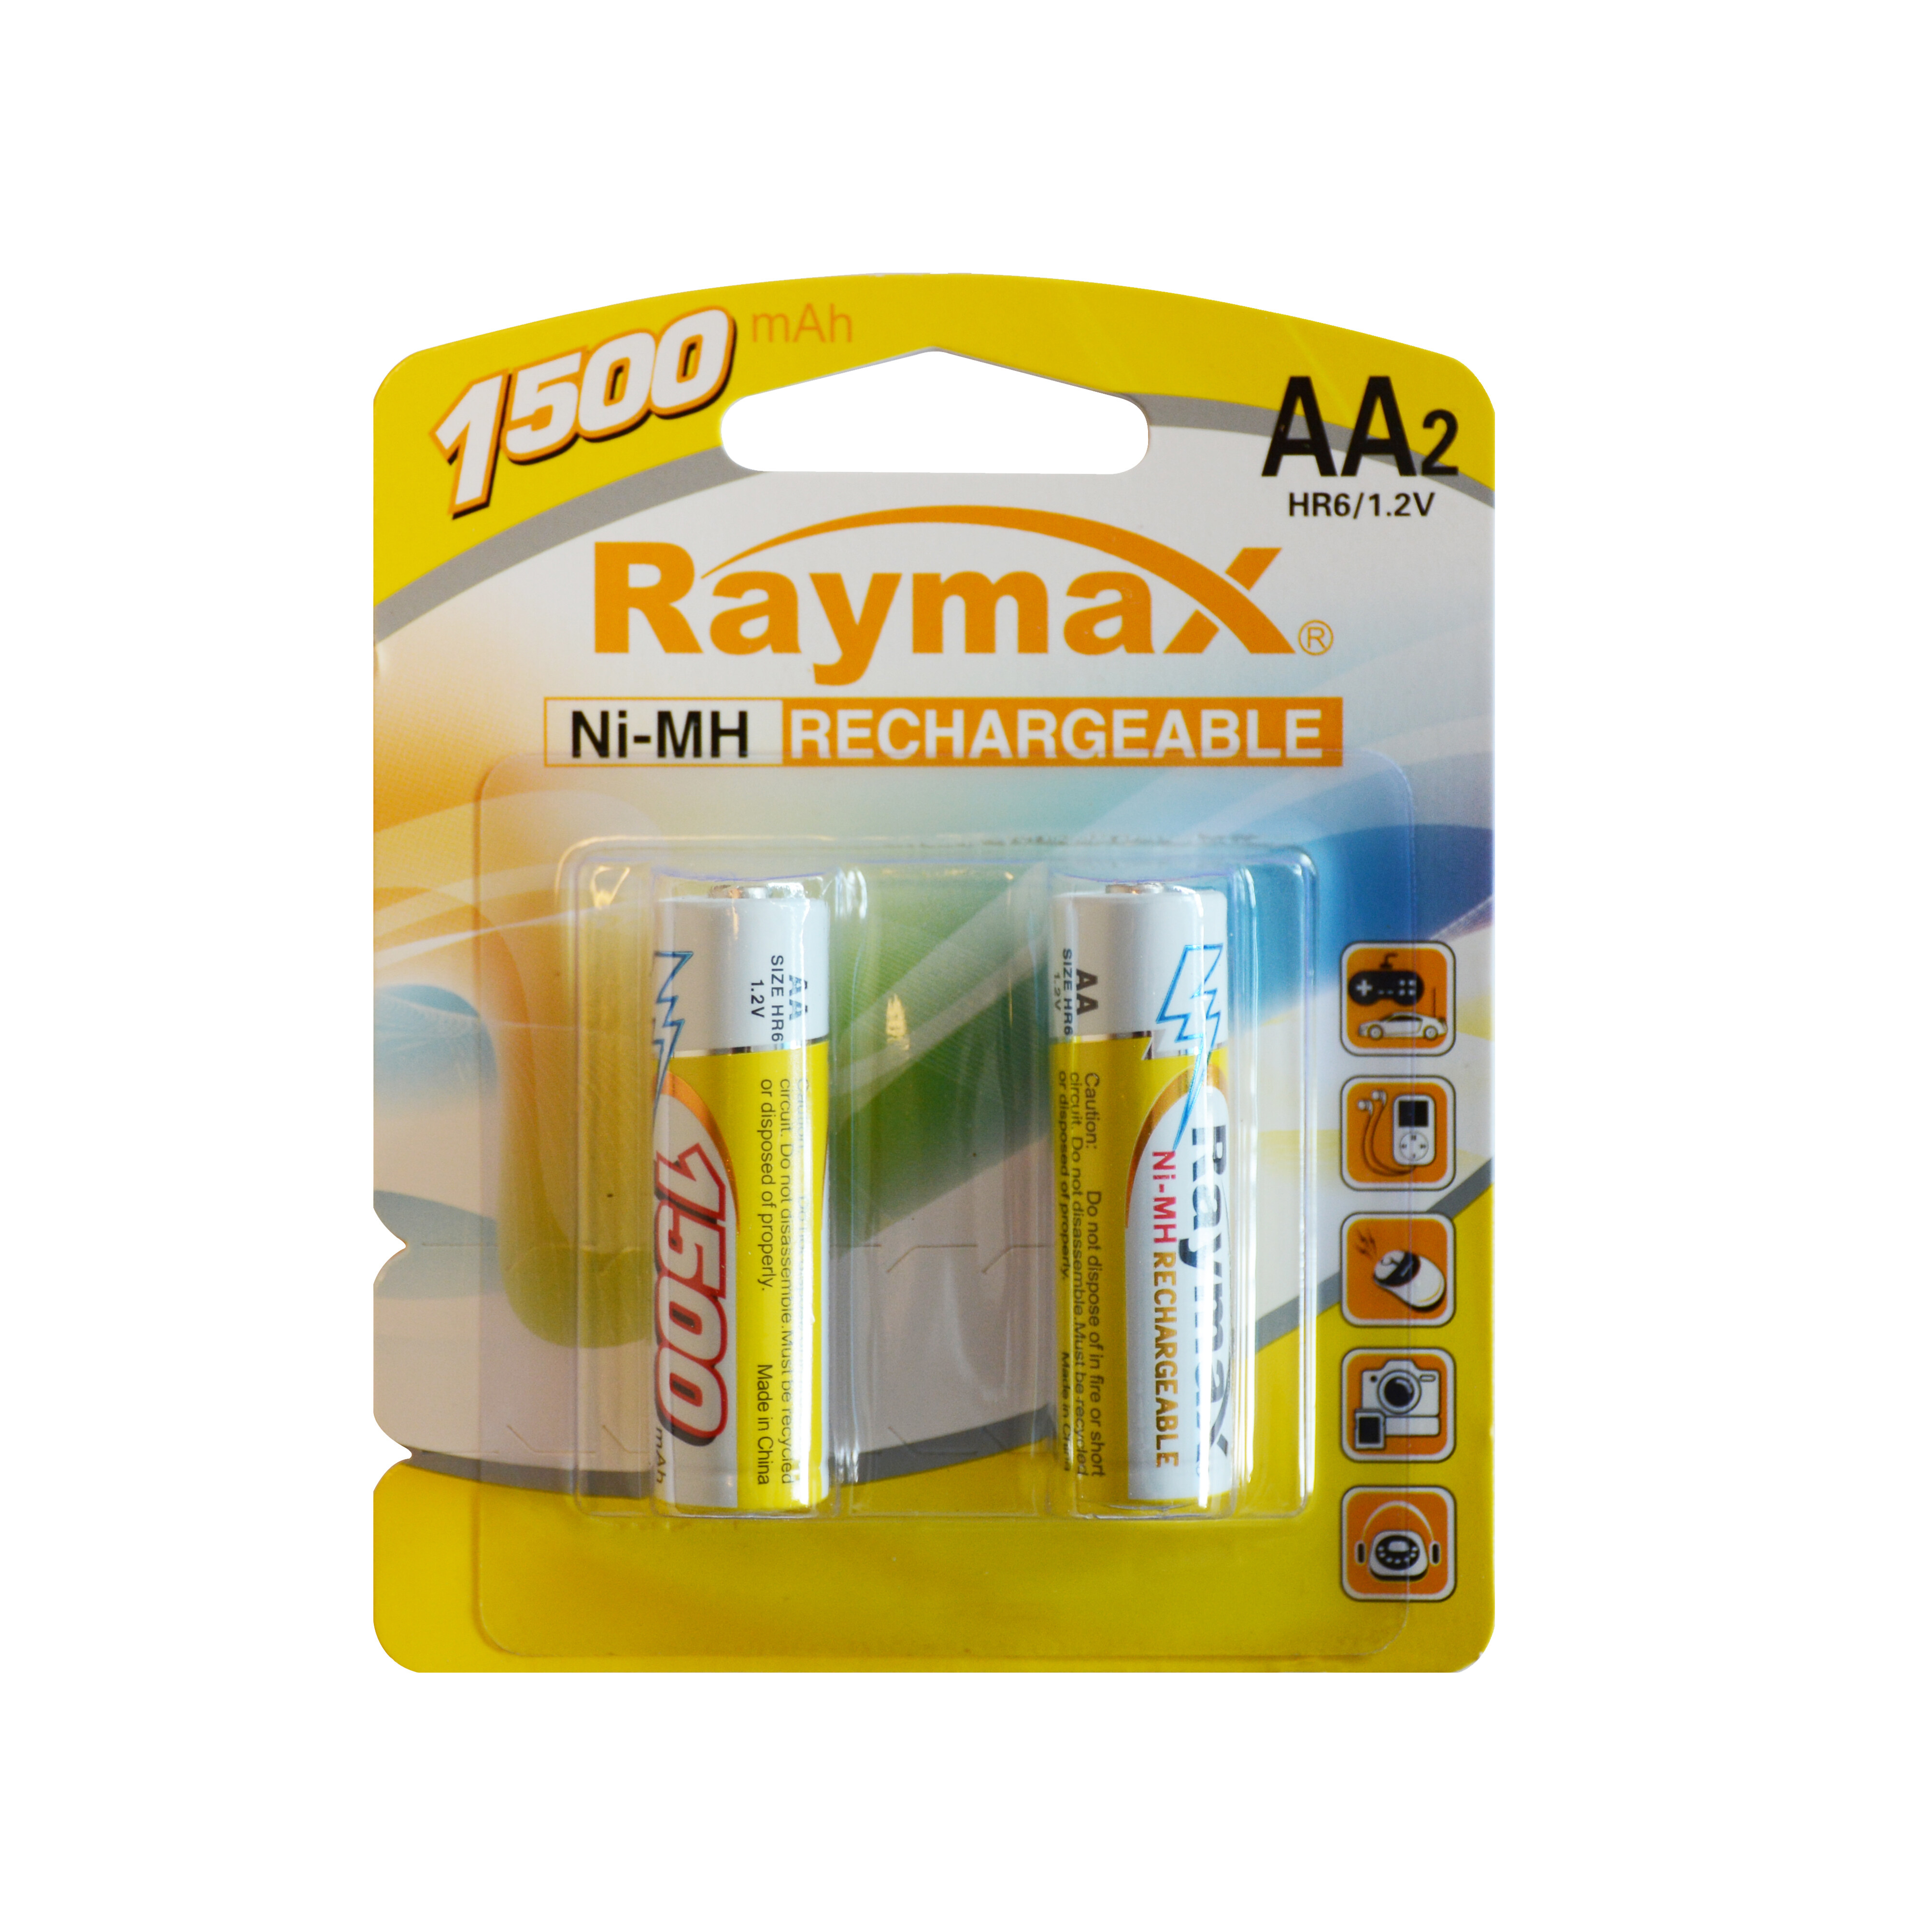 Raymax NIMH rechargeable HR6 AA Size battery 1.2V 1500mAh Long lasting, bulk pack of 2